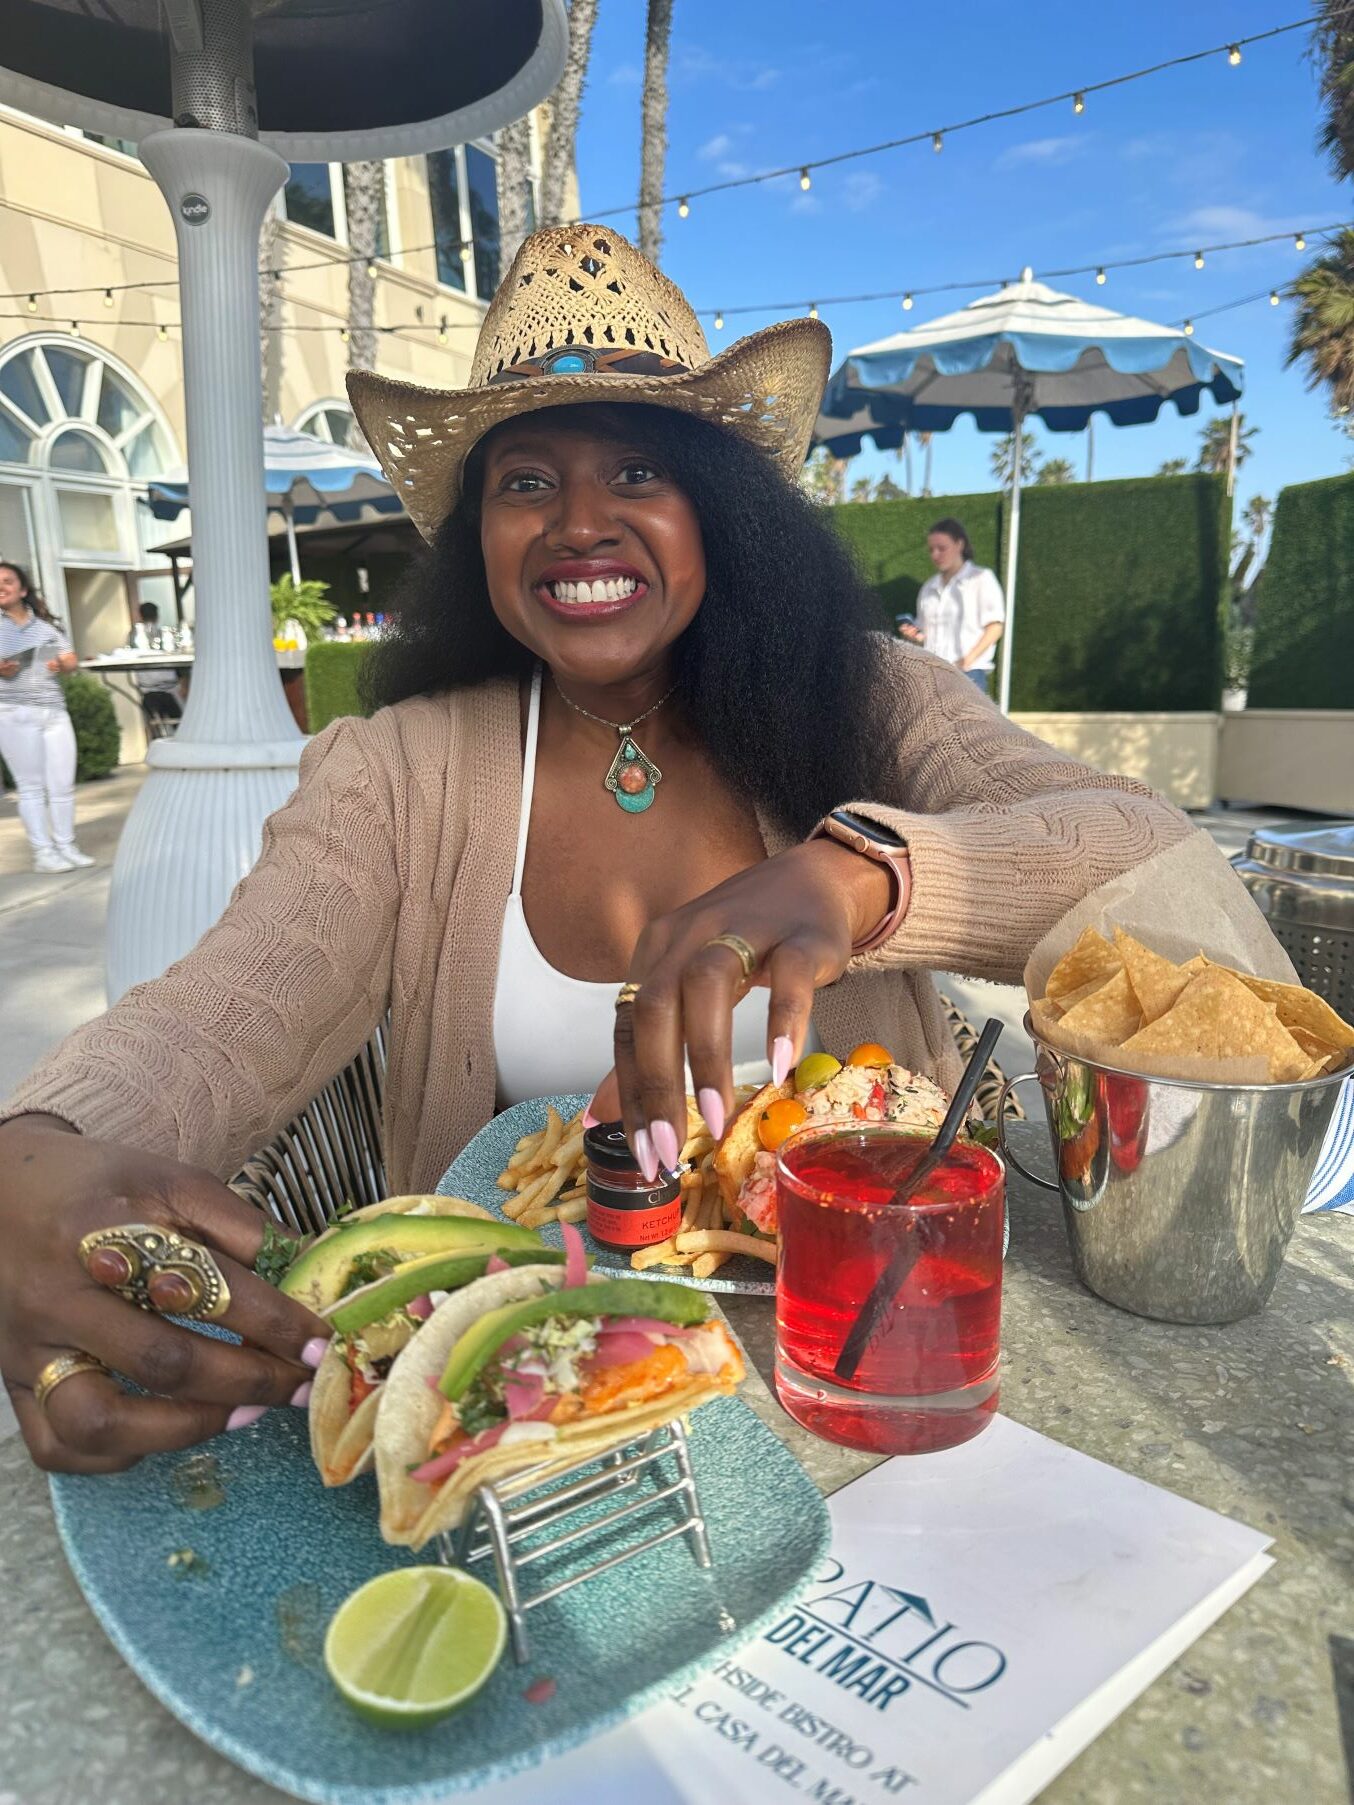 An image of lifestyle blogger Ariel at Patio del Mar.